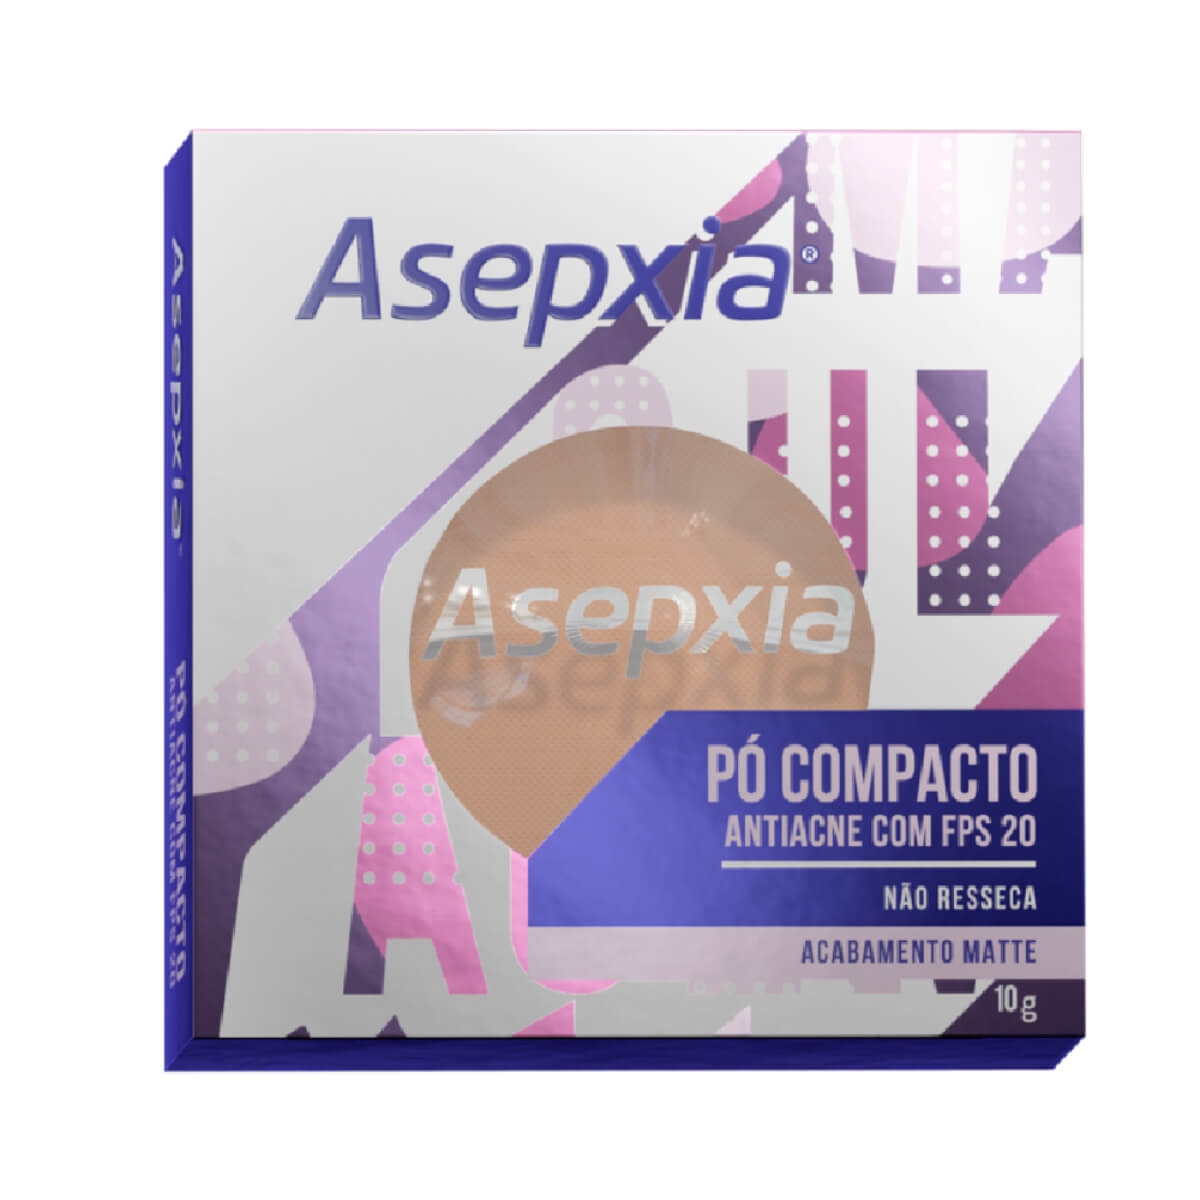 Pó Compacto Asepxia Antiacne Cor Bege Claro FPS20 10g